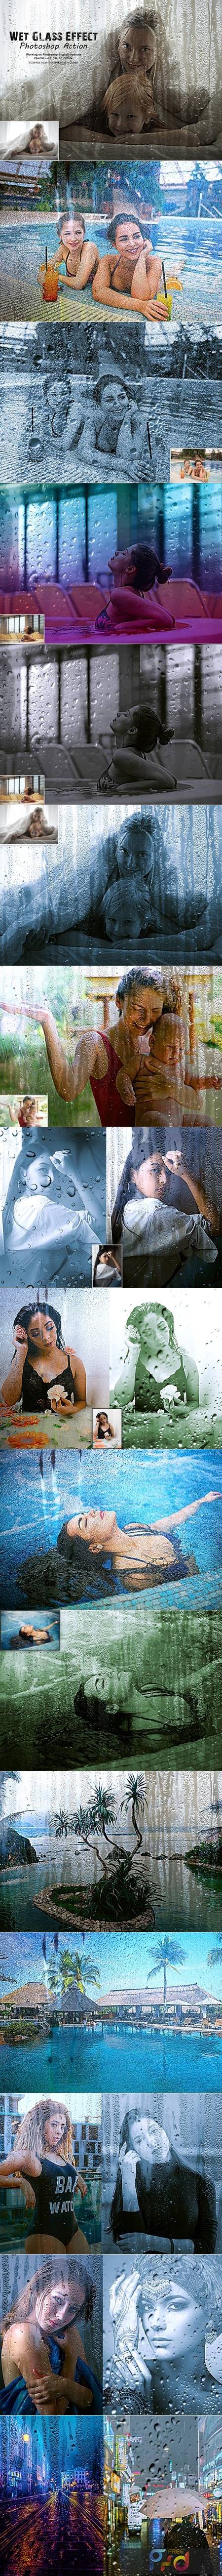 Wet Glass Effect Photoshop Action